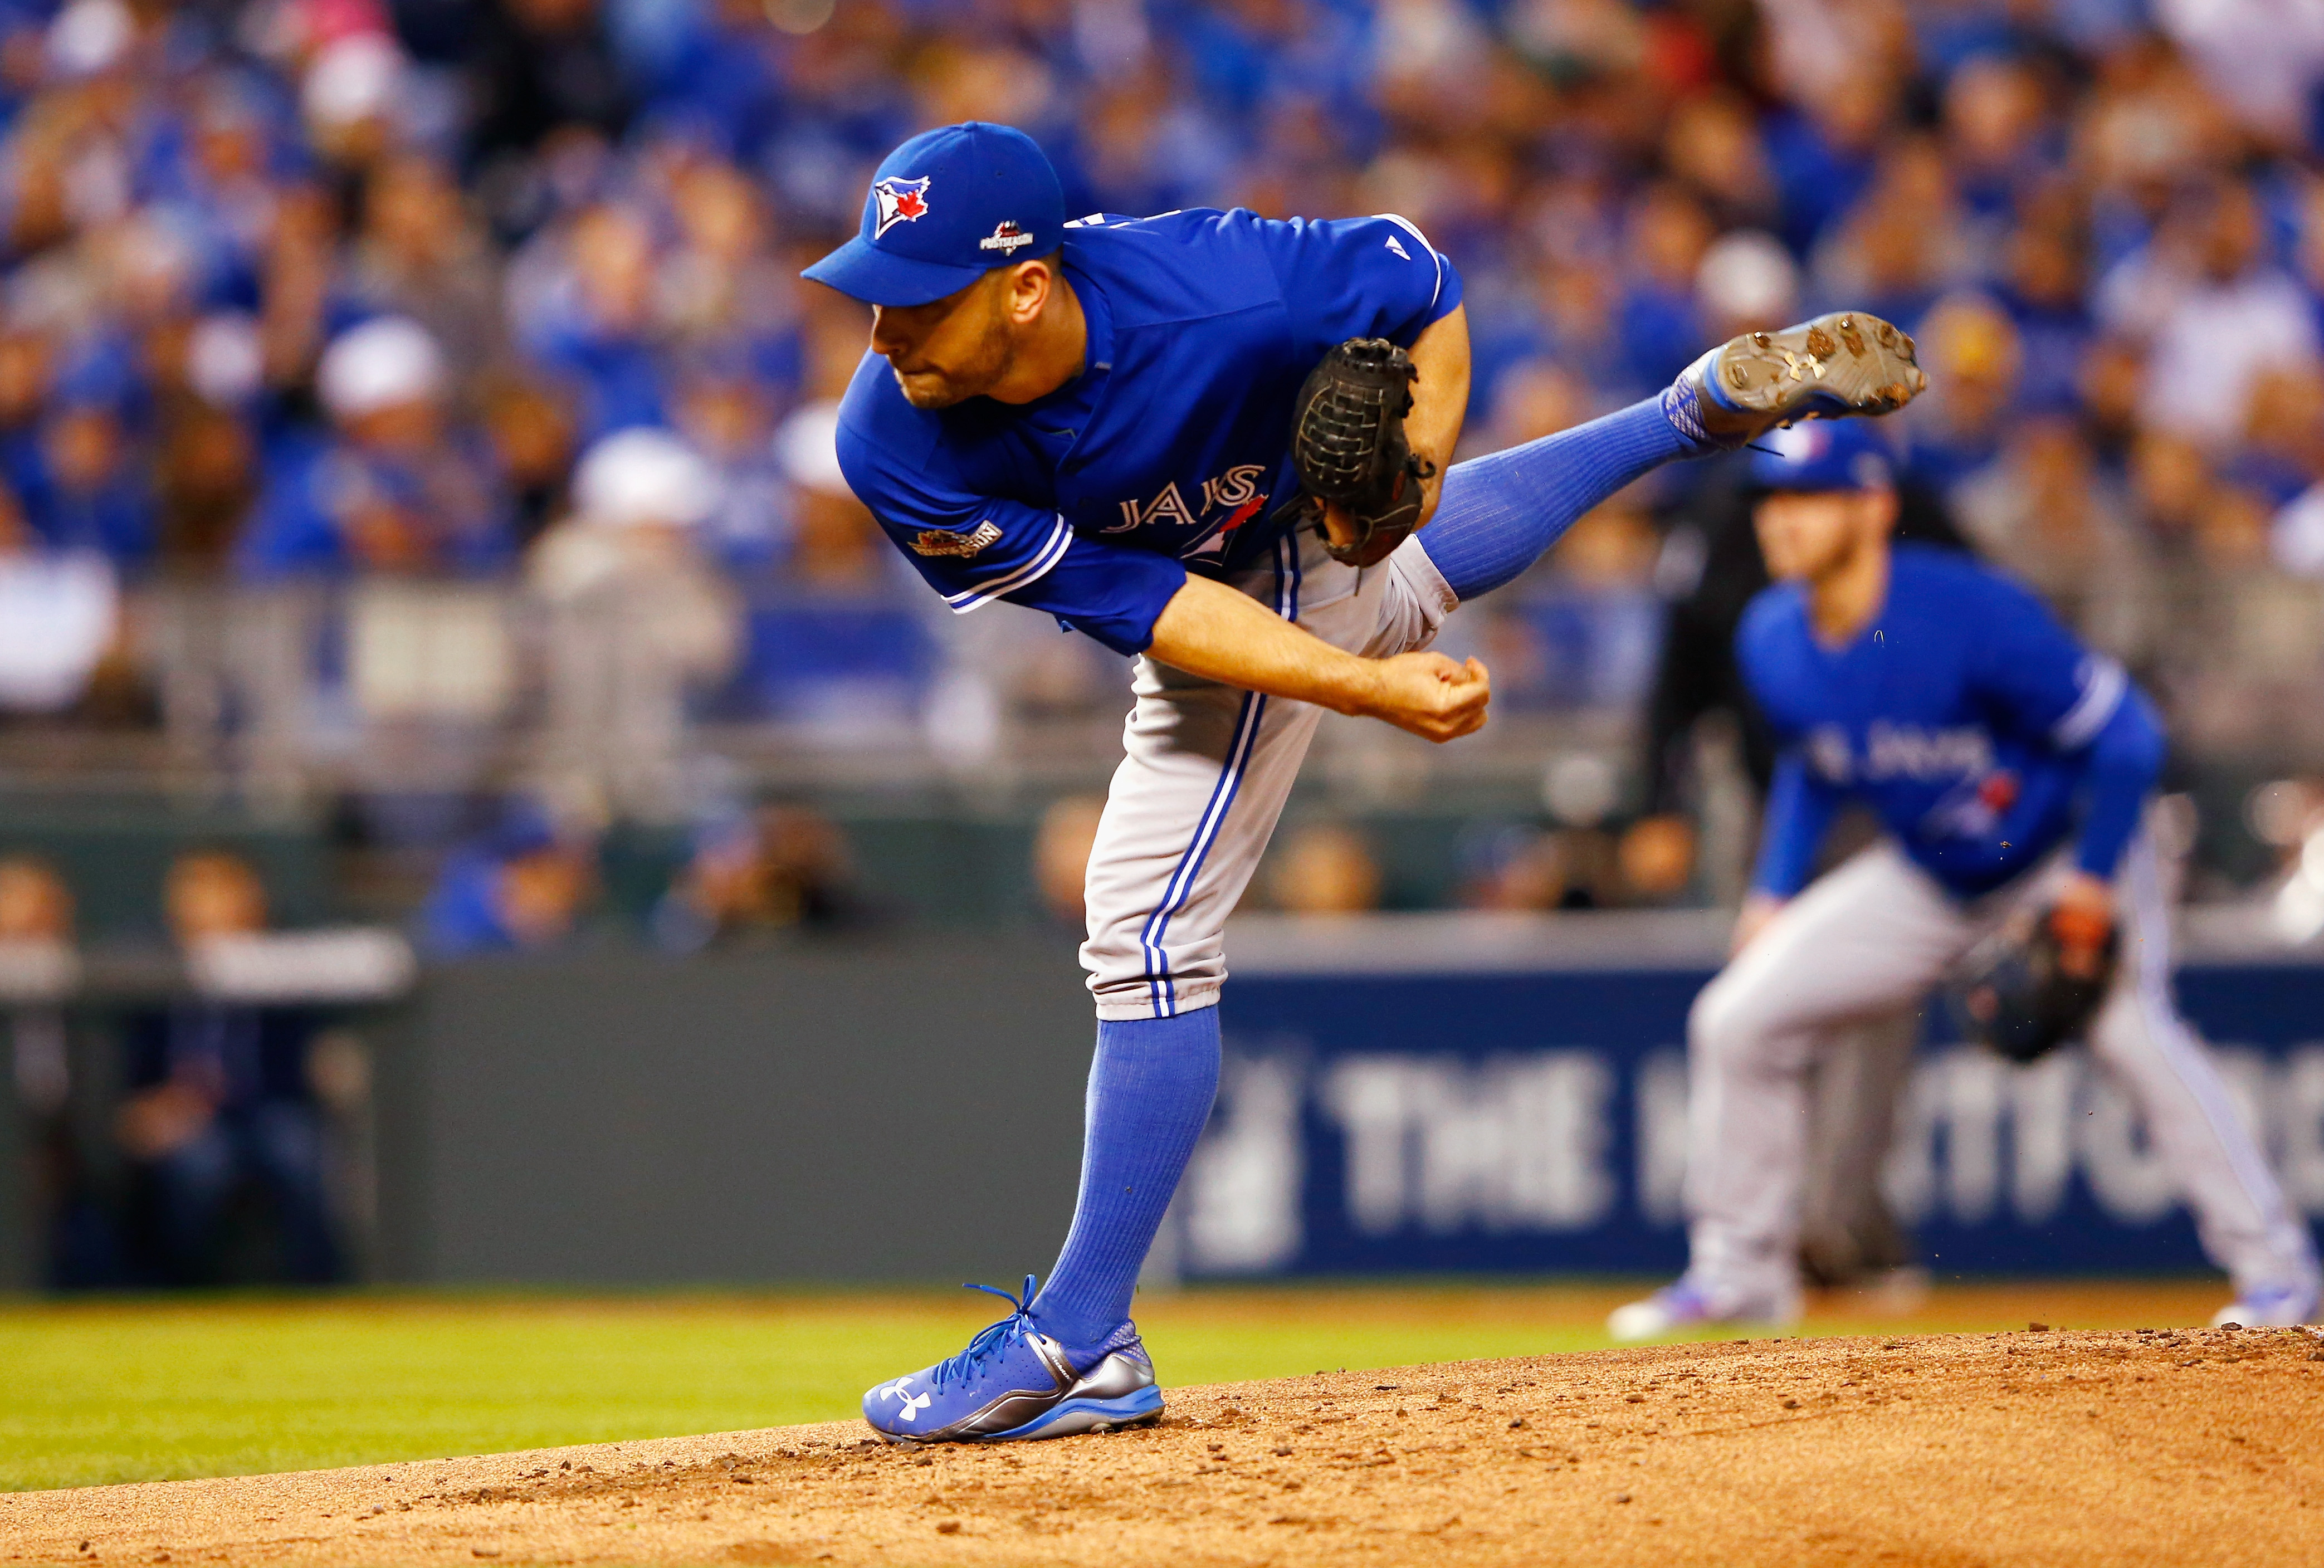 How to Watch ALCS Game 5 Royals vs. Blue Jays Live Stream Online